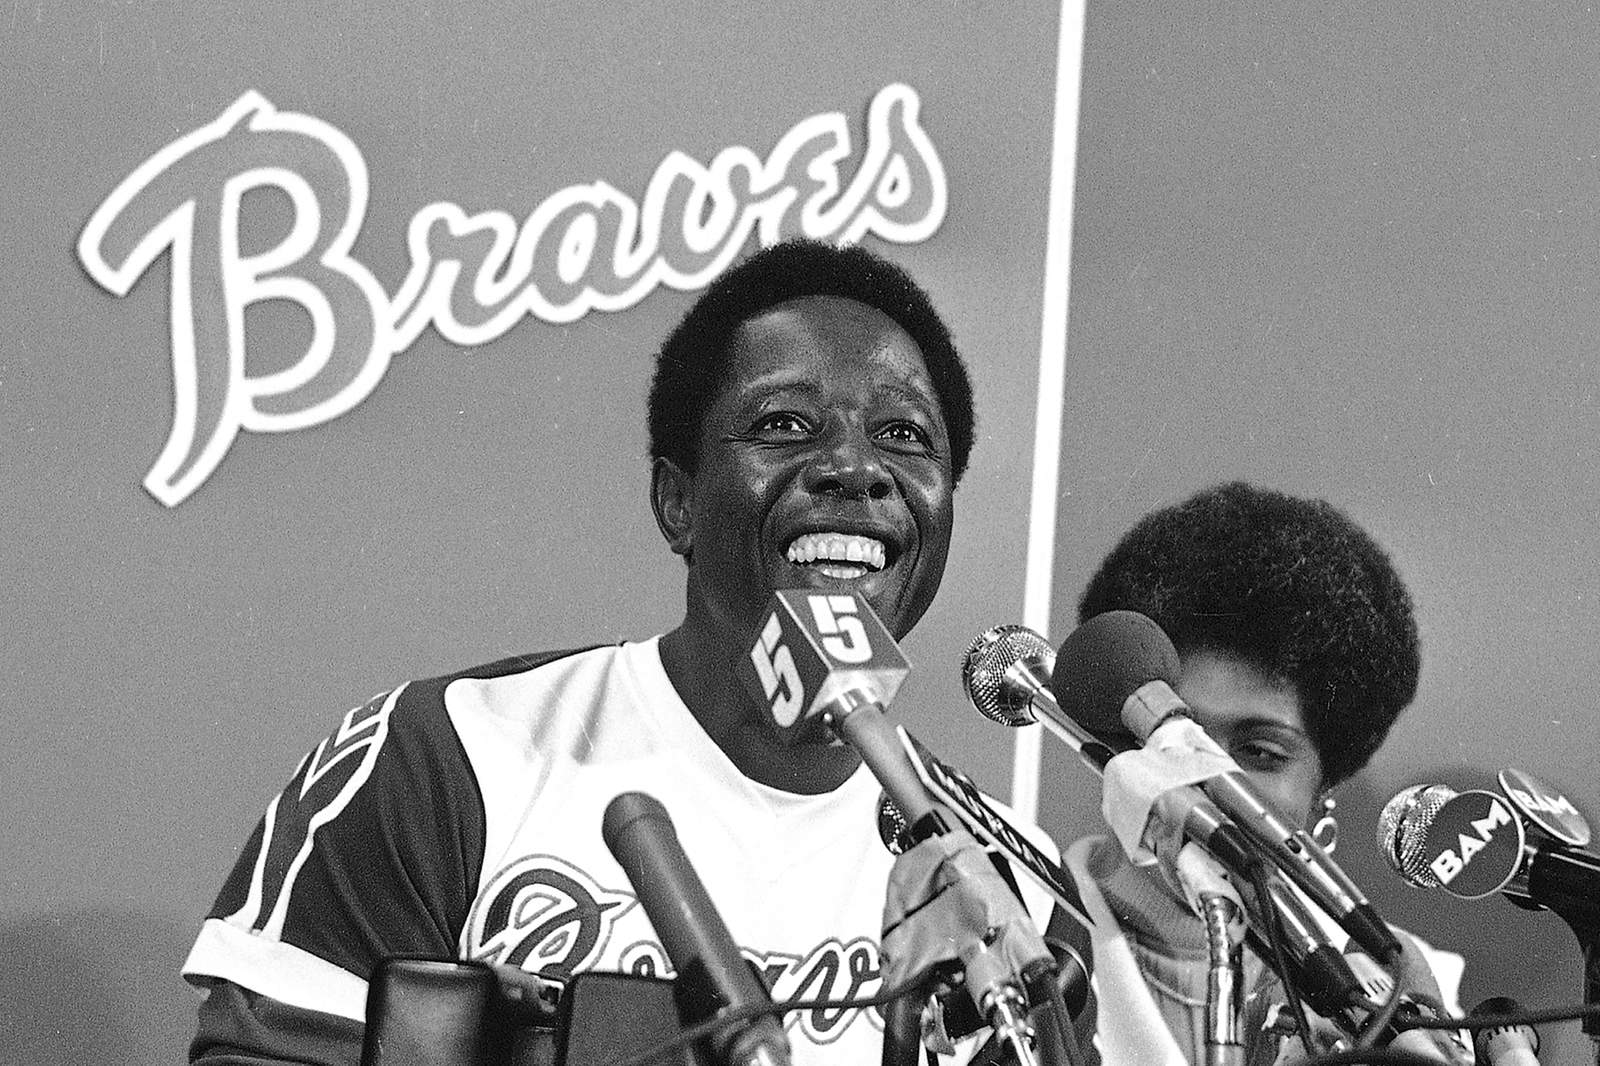 Timeline of Hank Aaron’s life and career